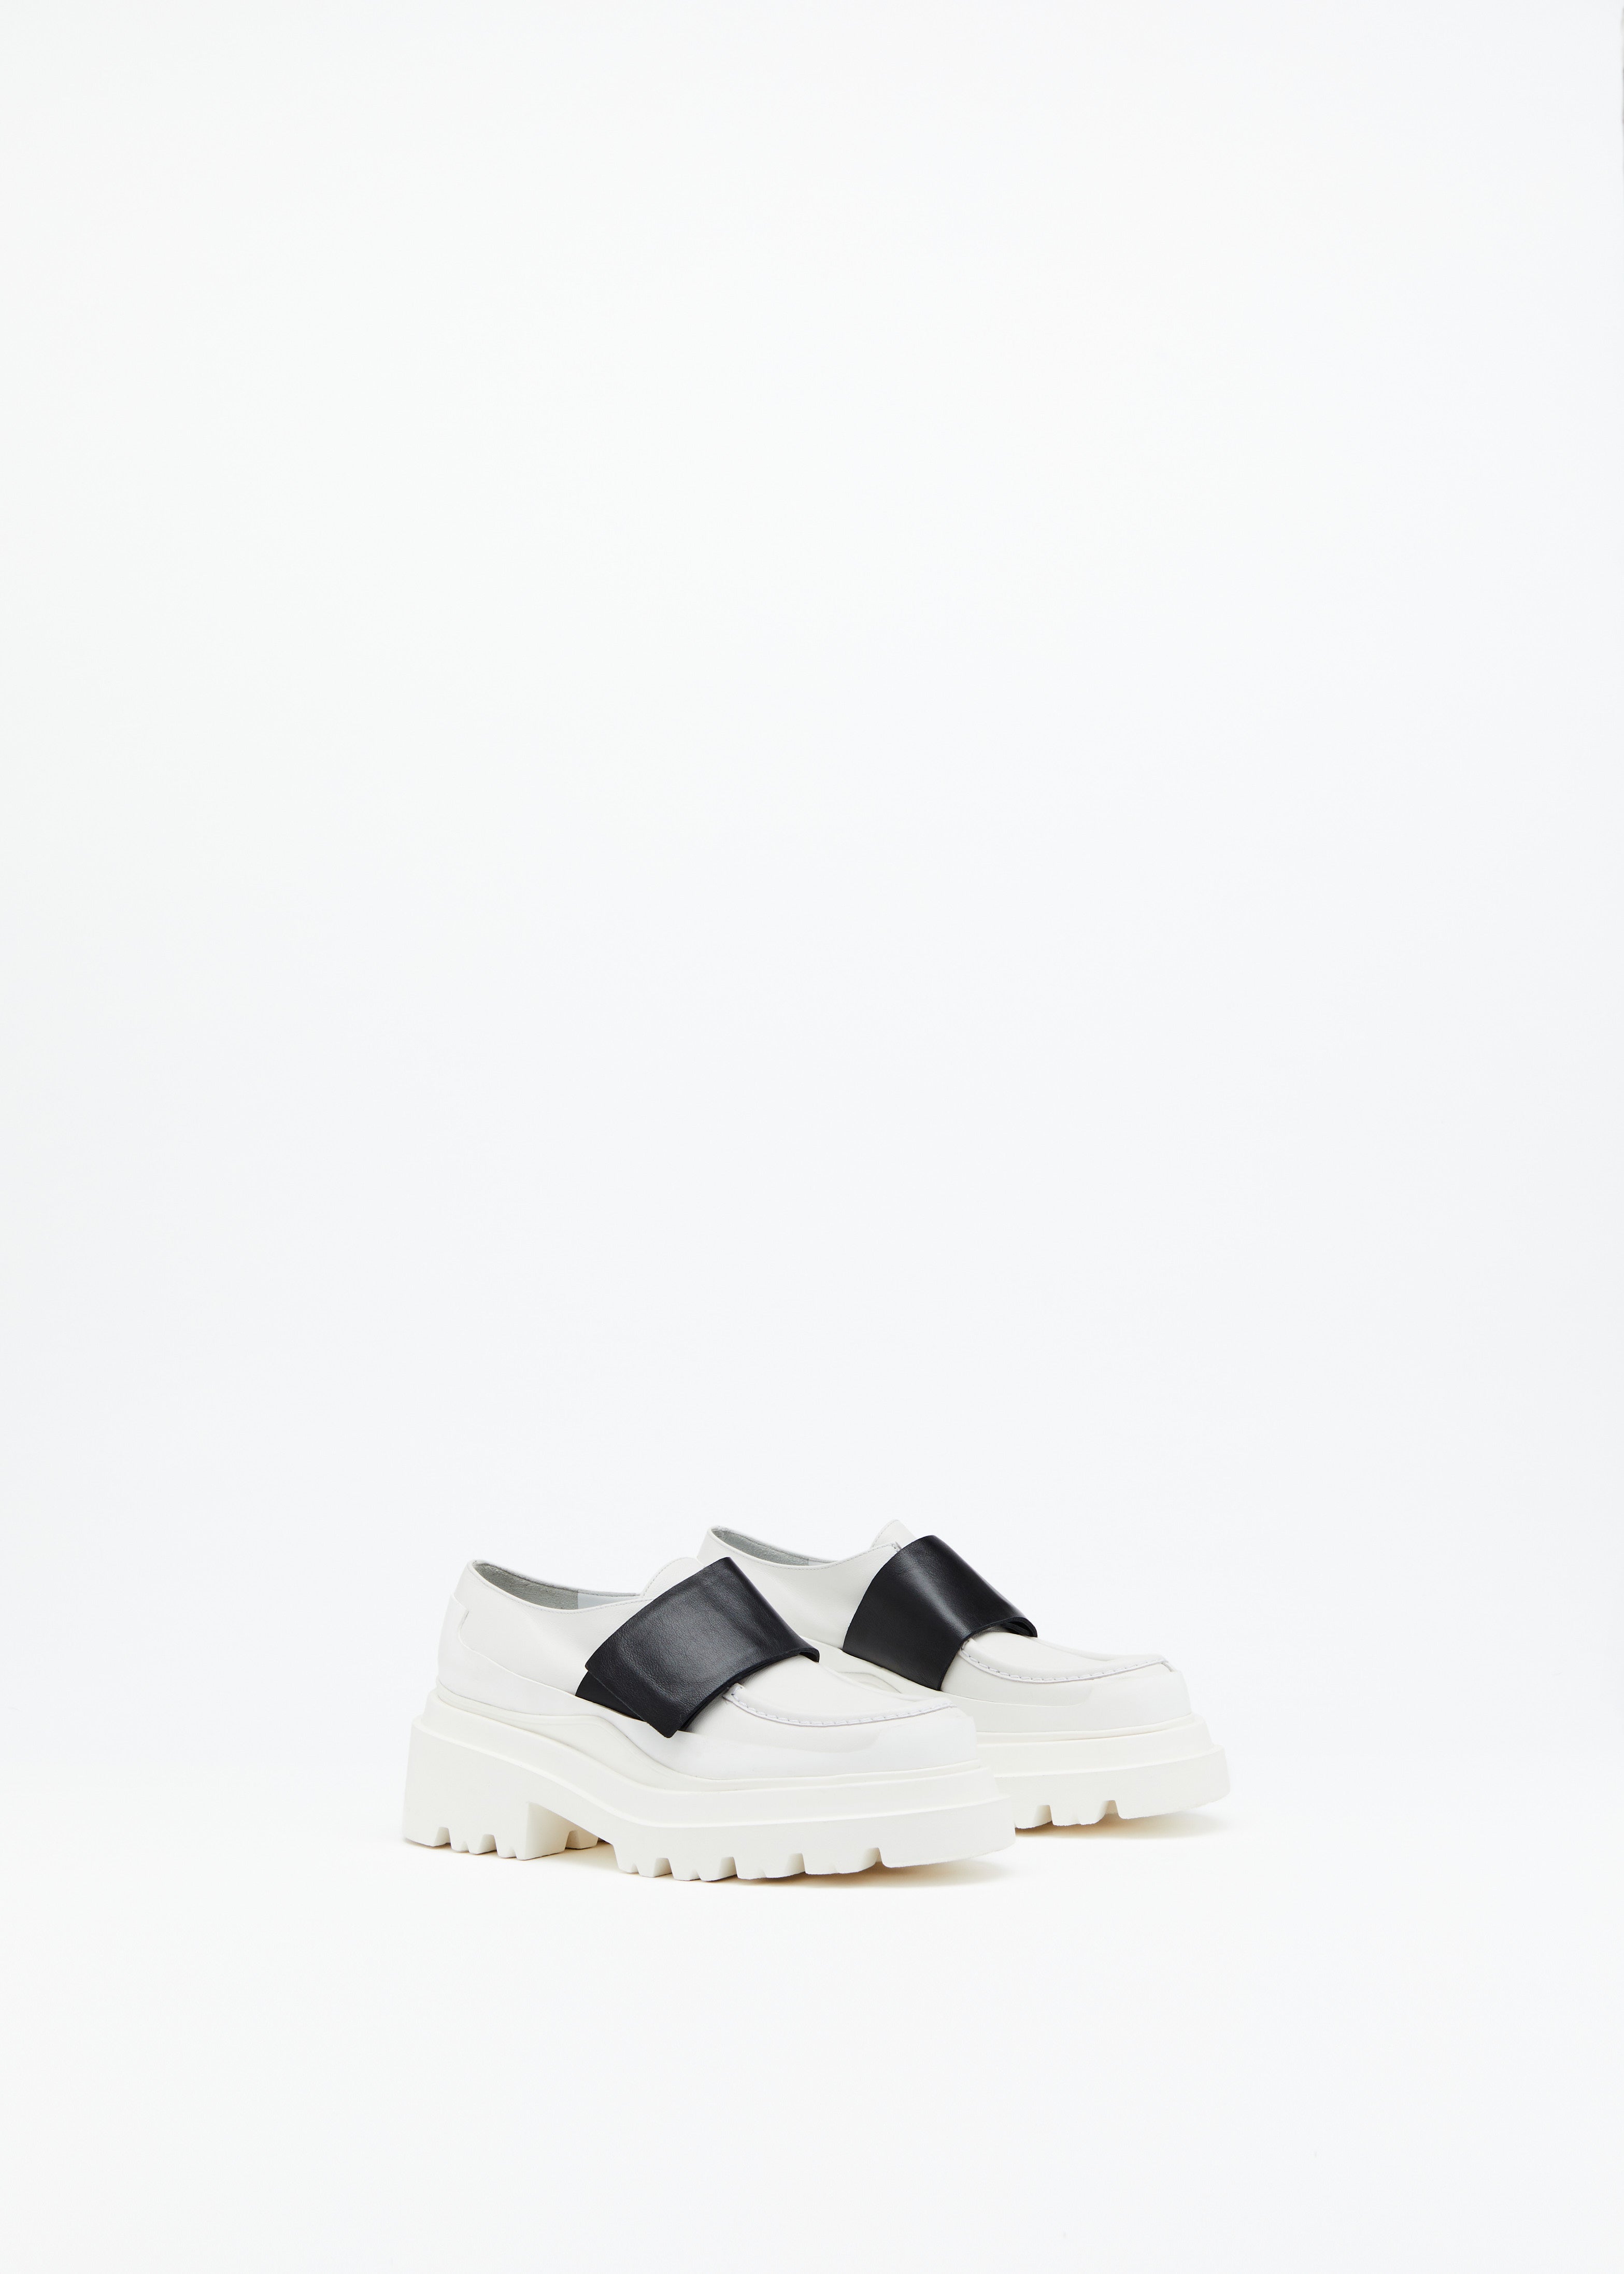 LEATHER LUG SOLE WHITE LOAFER